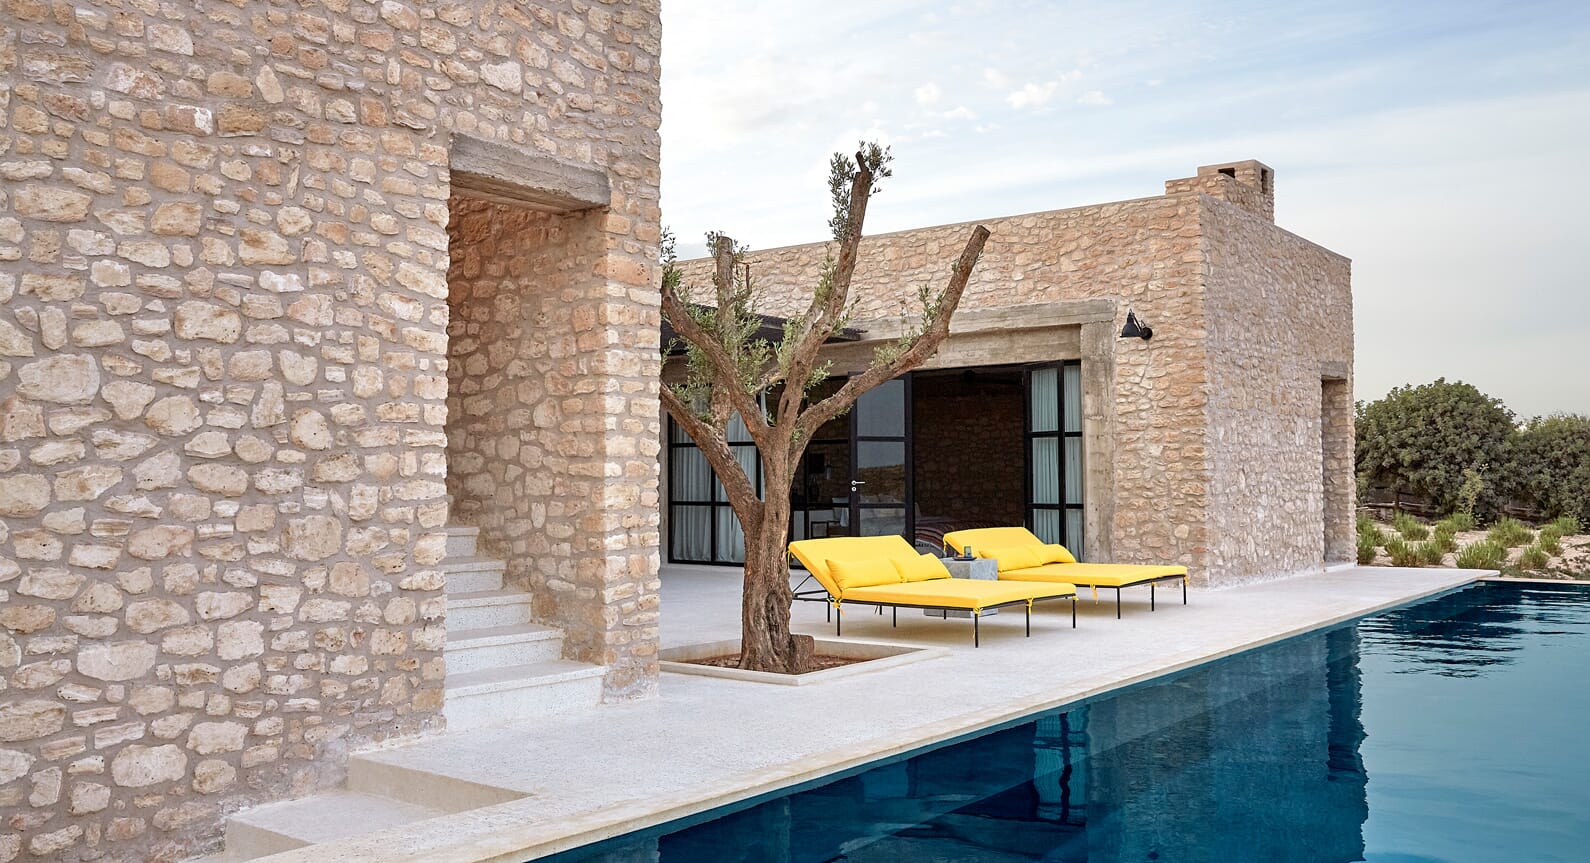 You Can Now Stay At This Secluded Hideaway In Essaouira, Morocco